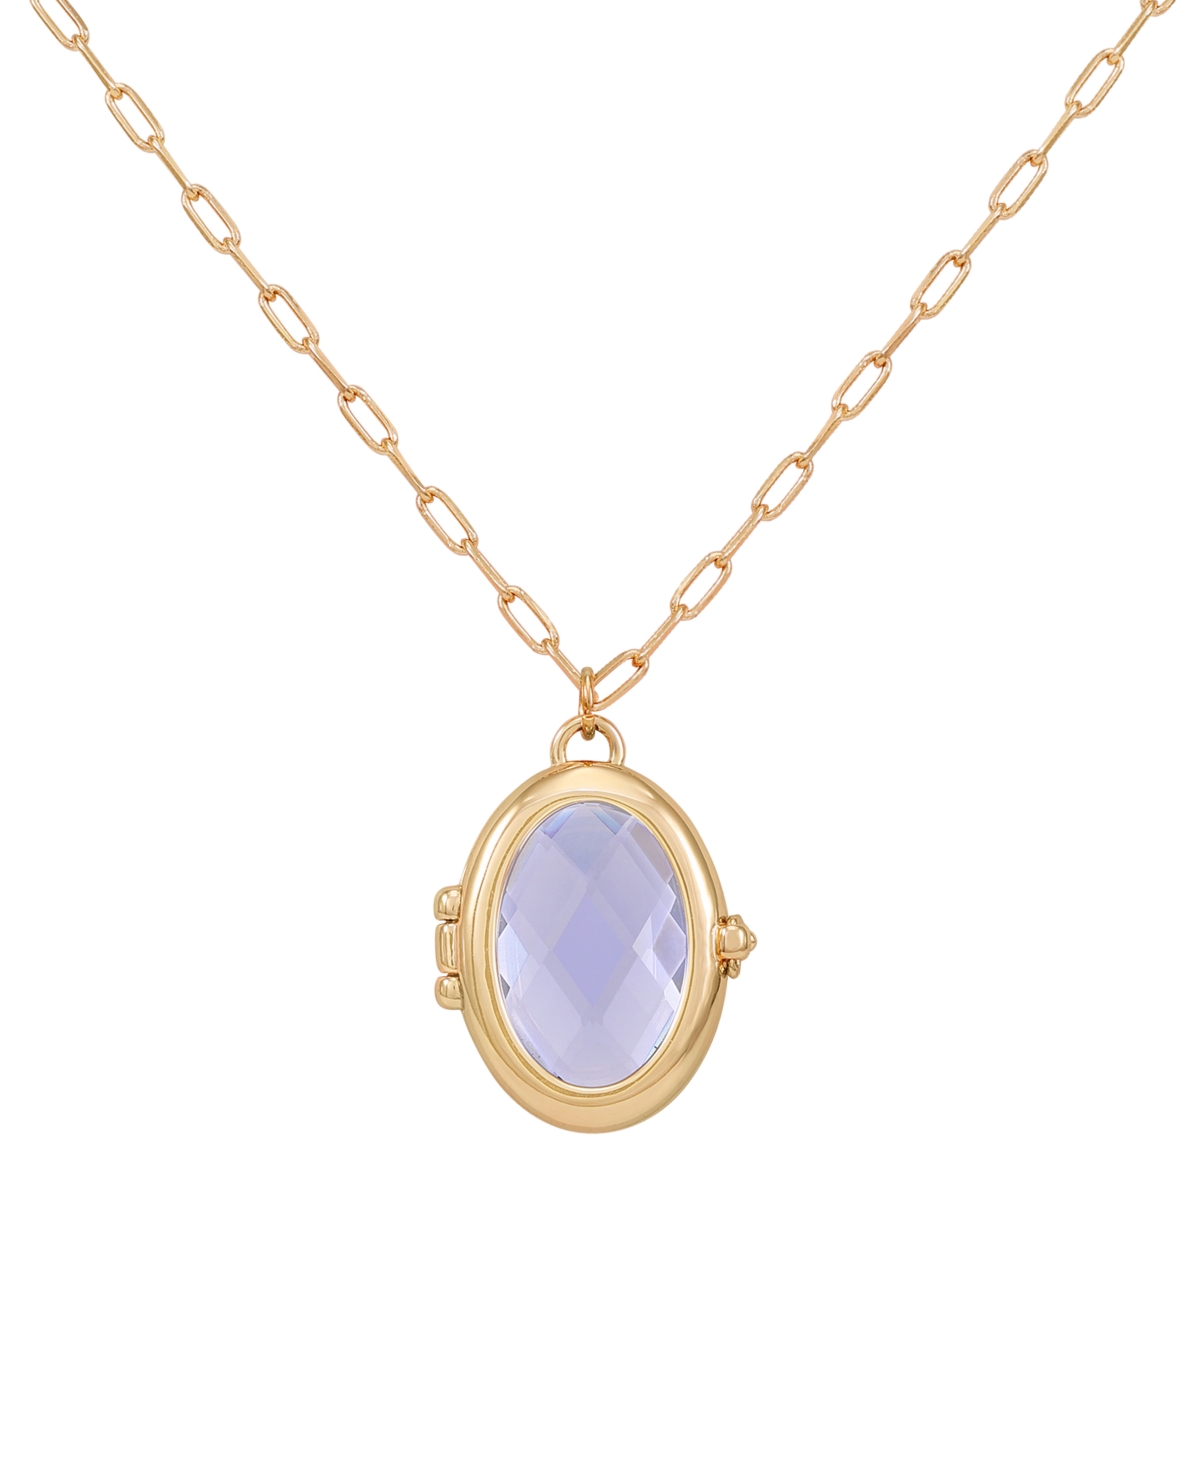 Guess Gold-tone Removable Stone Oval Locket Pendant Necklace, 18" + 3" Extender In Tanz